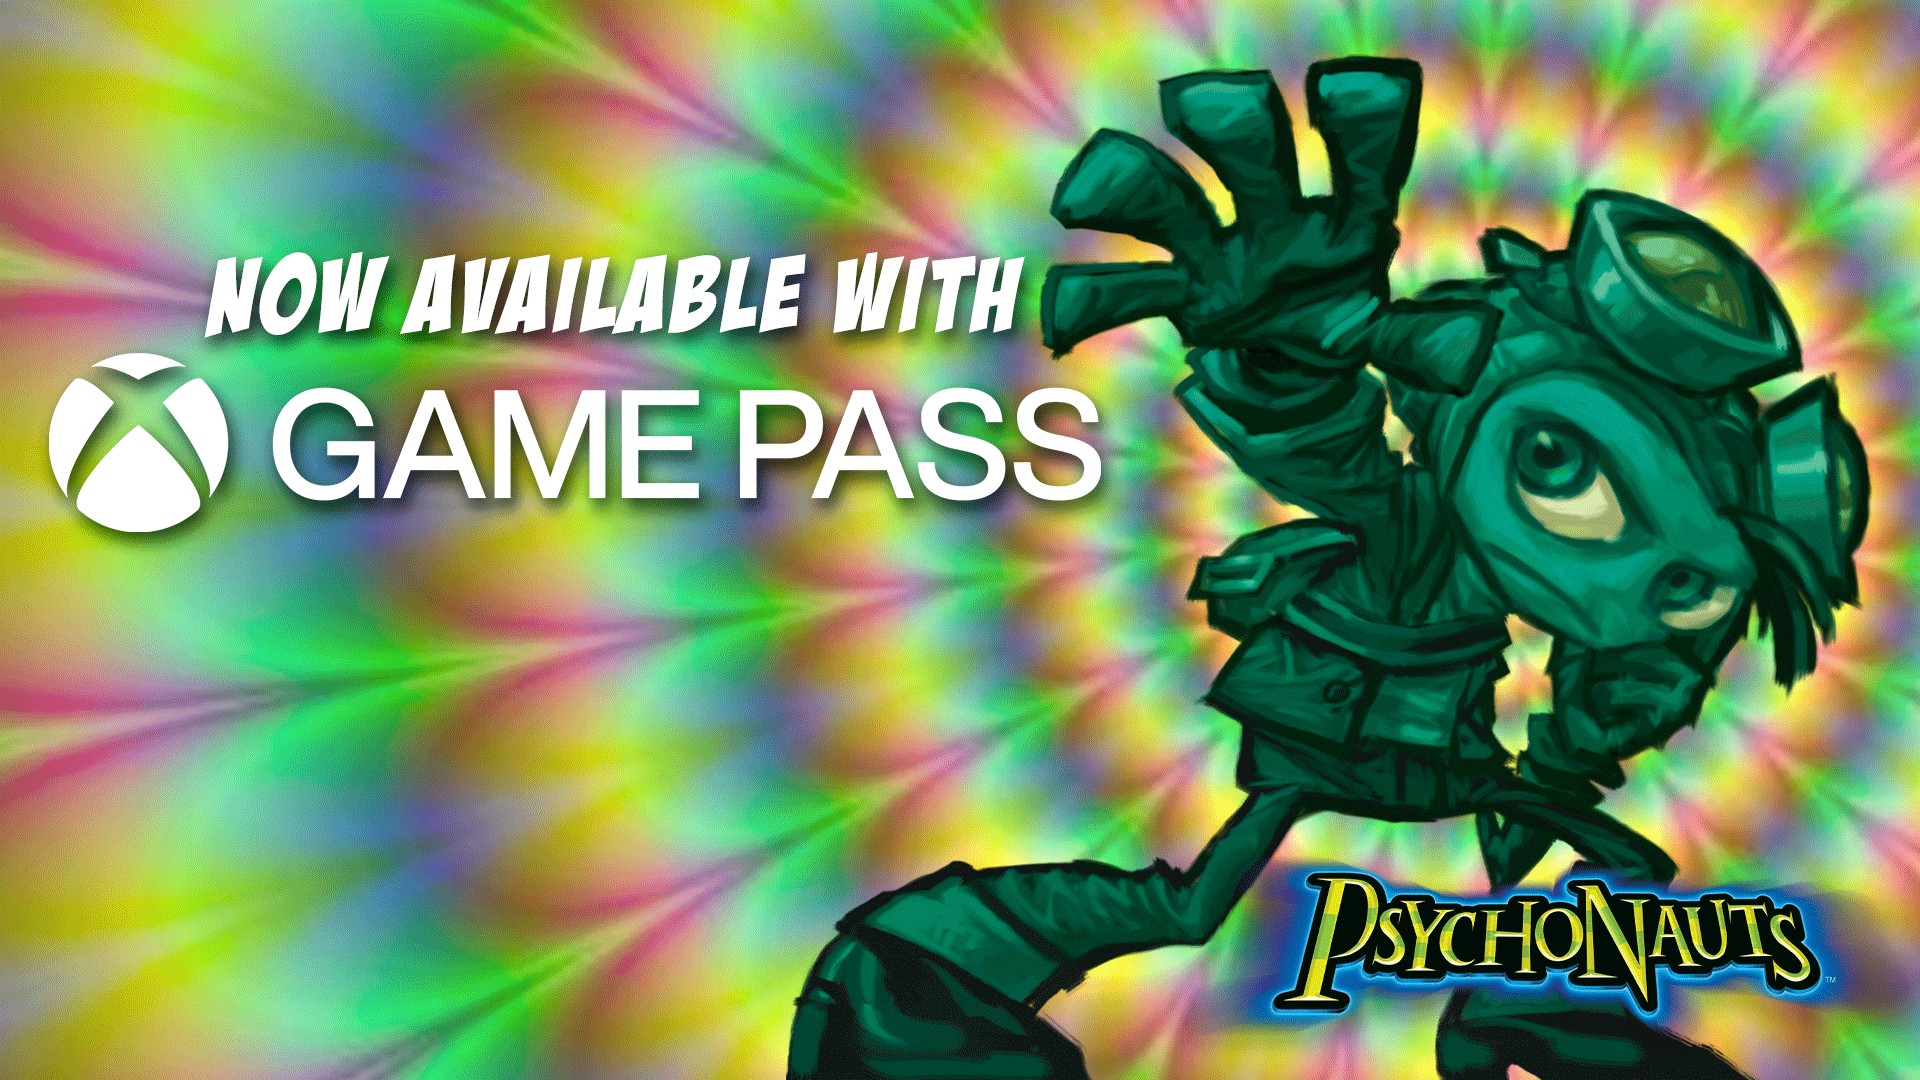 Video For Psychonauts Available Now with Xbox Game Pass